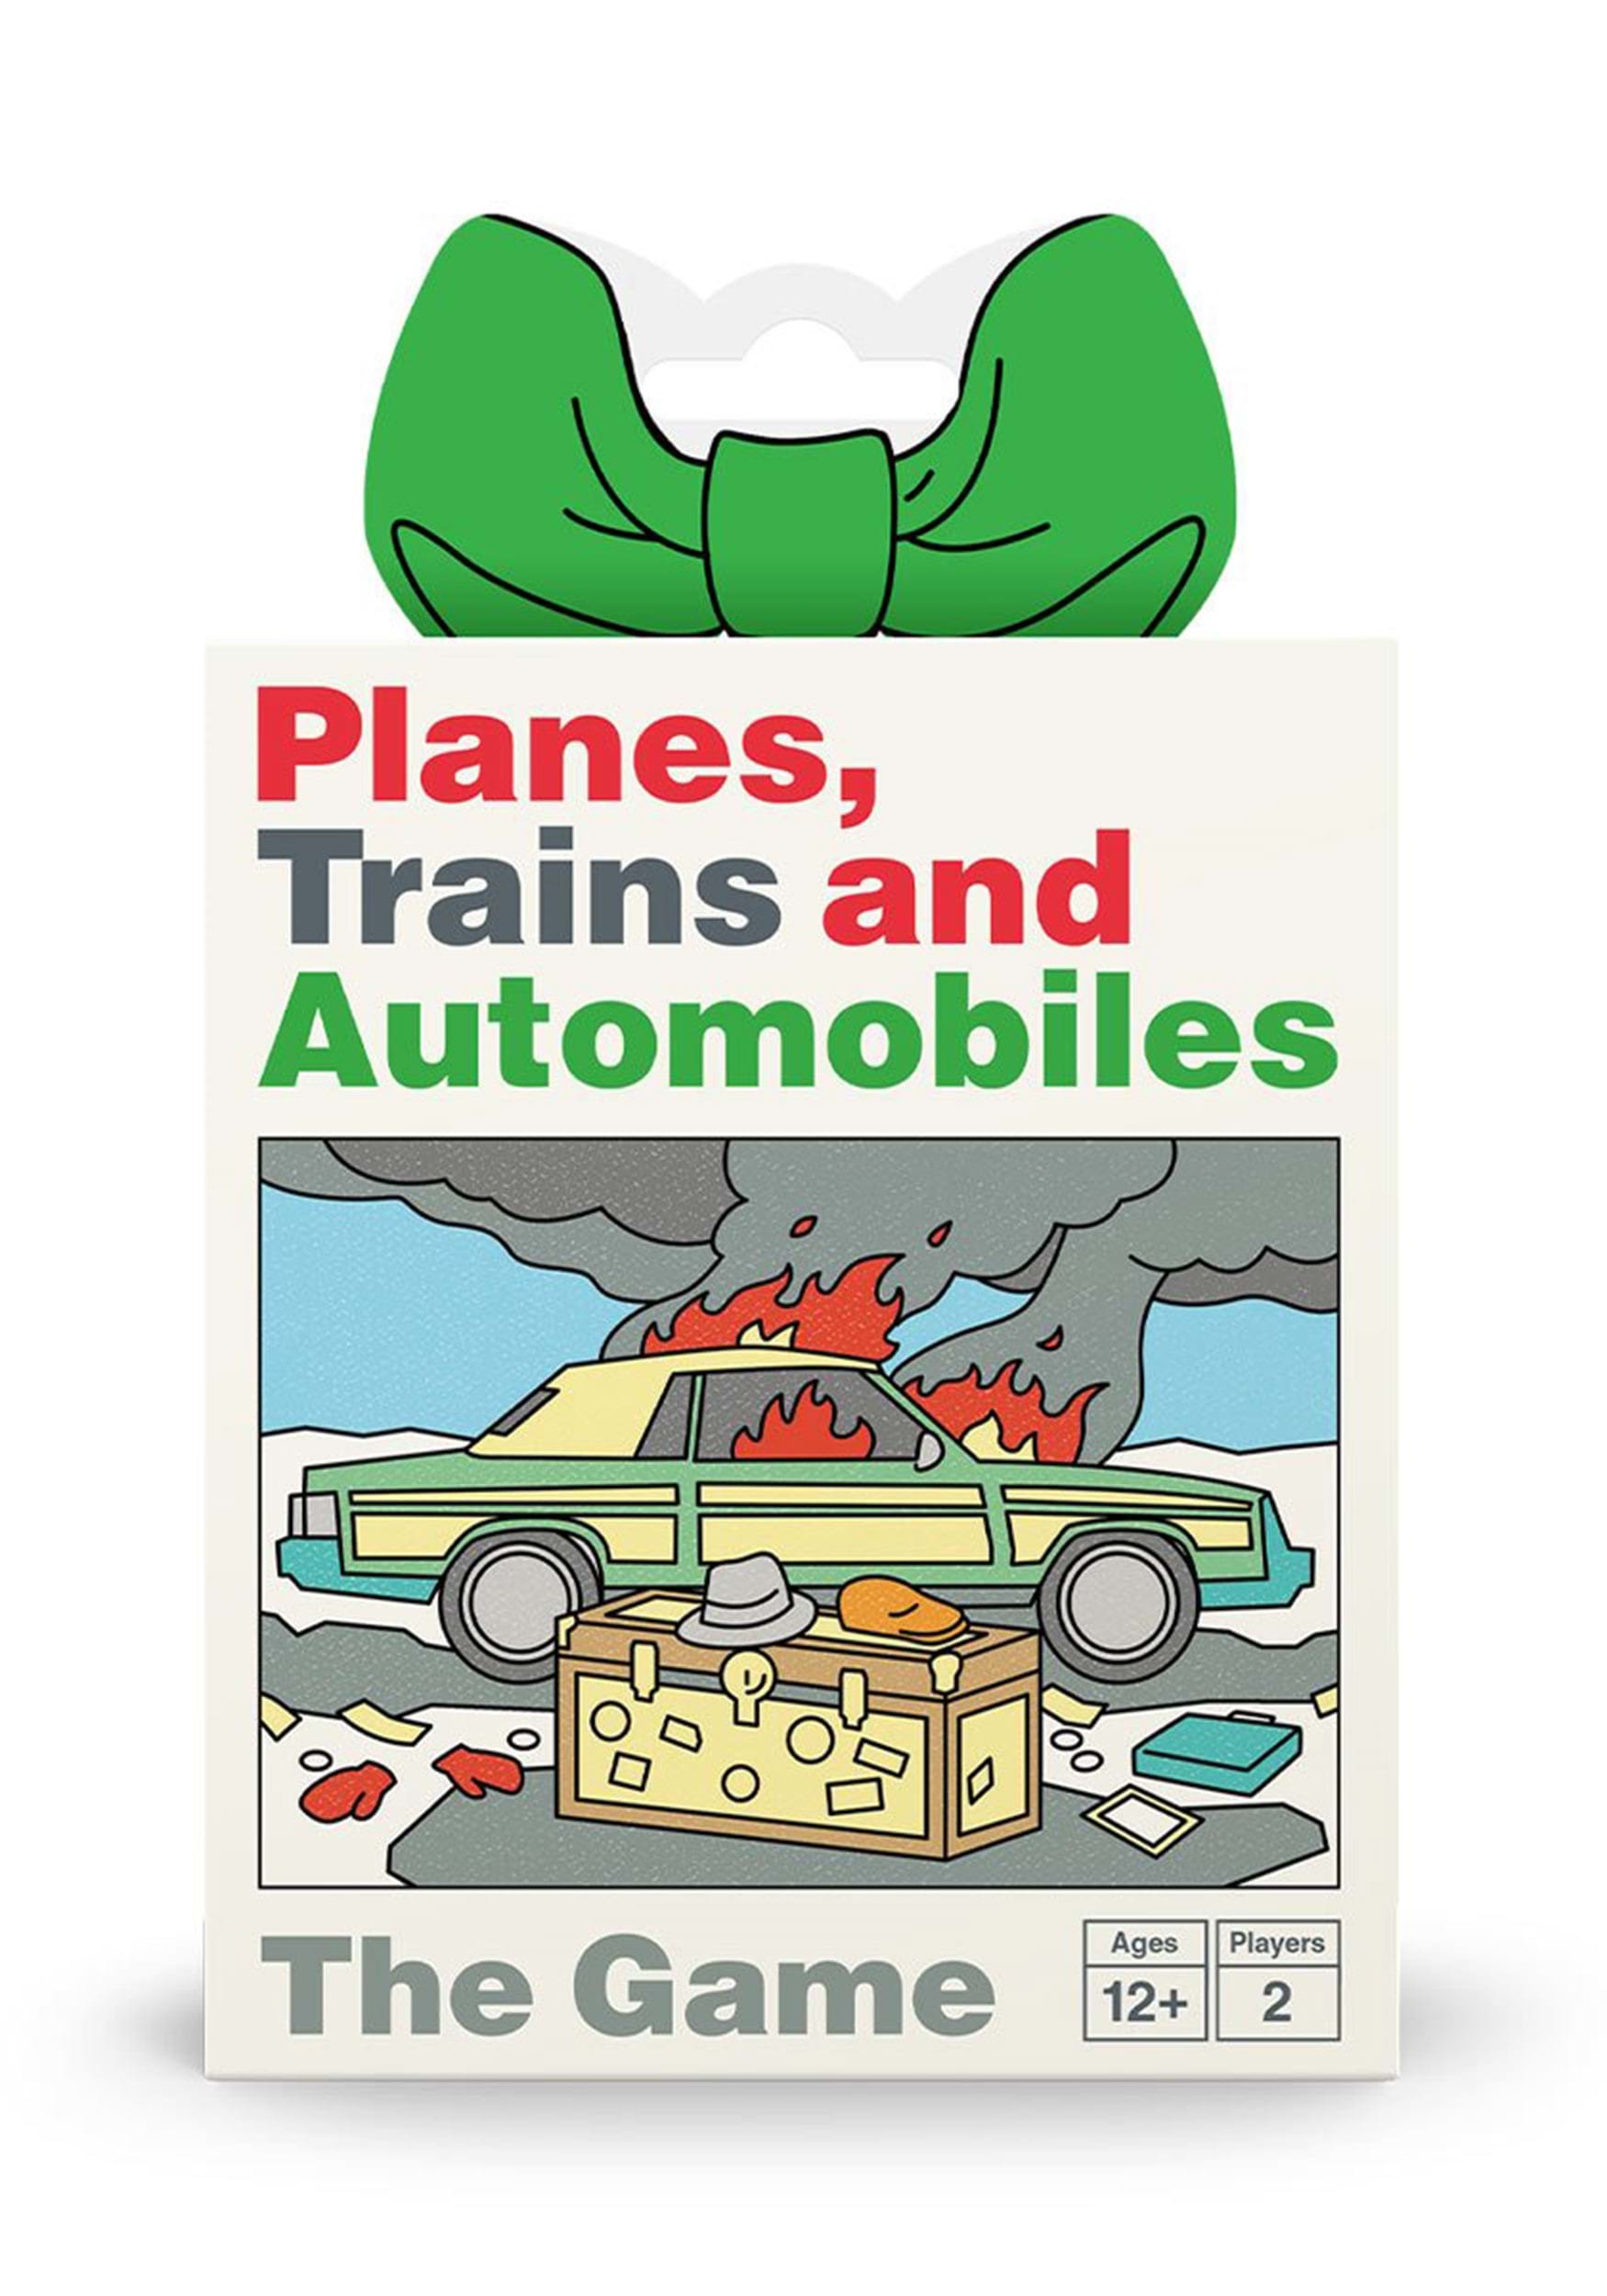 Funko Planes, Trains And Automobiles Card Game